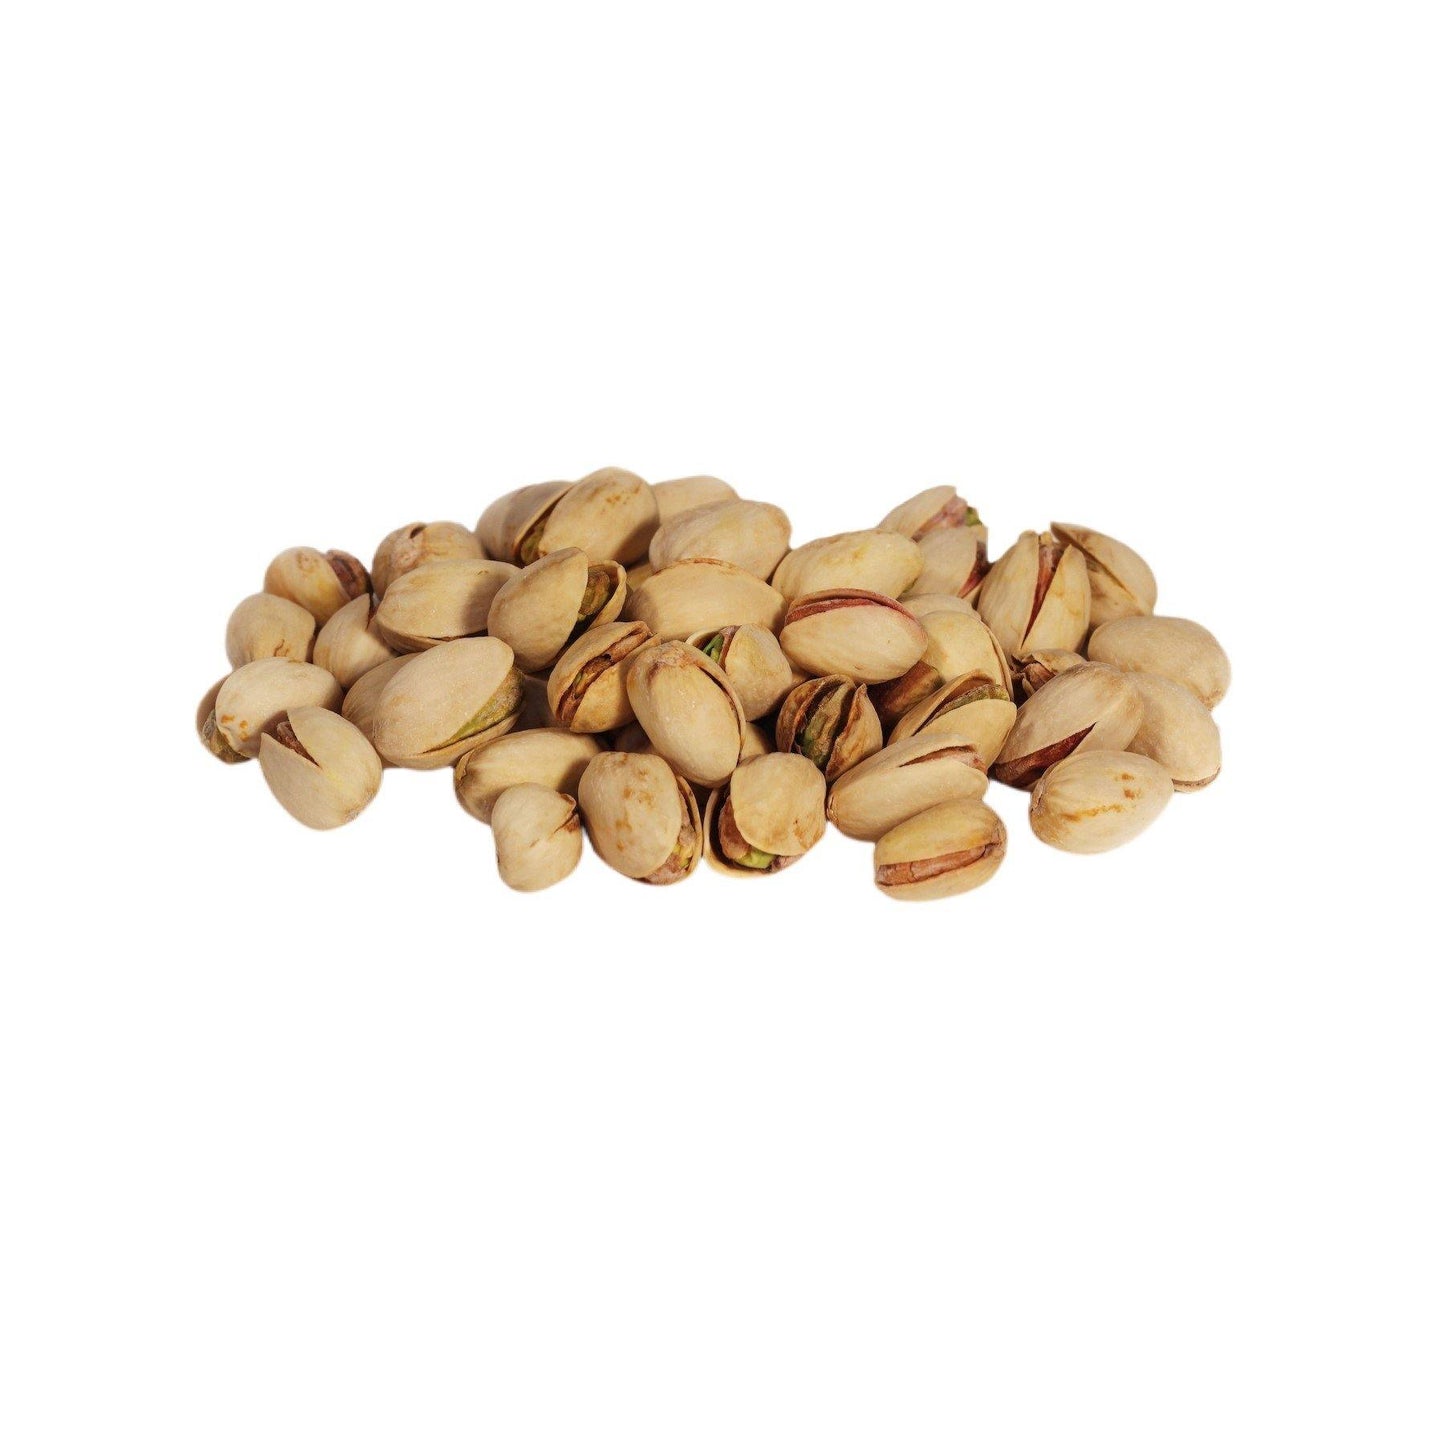 Salted Pistachios - The Dormen Food Company